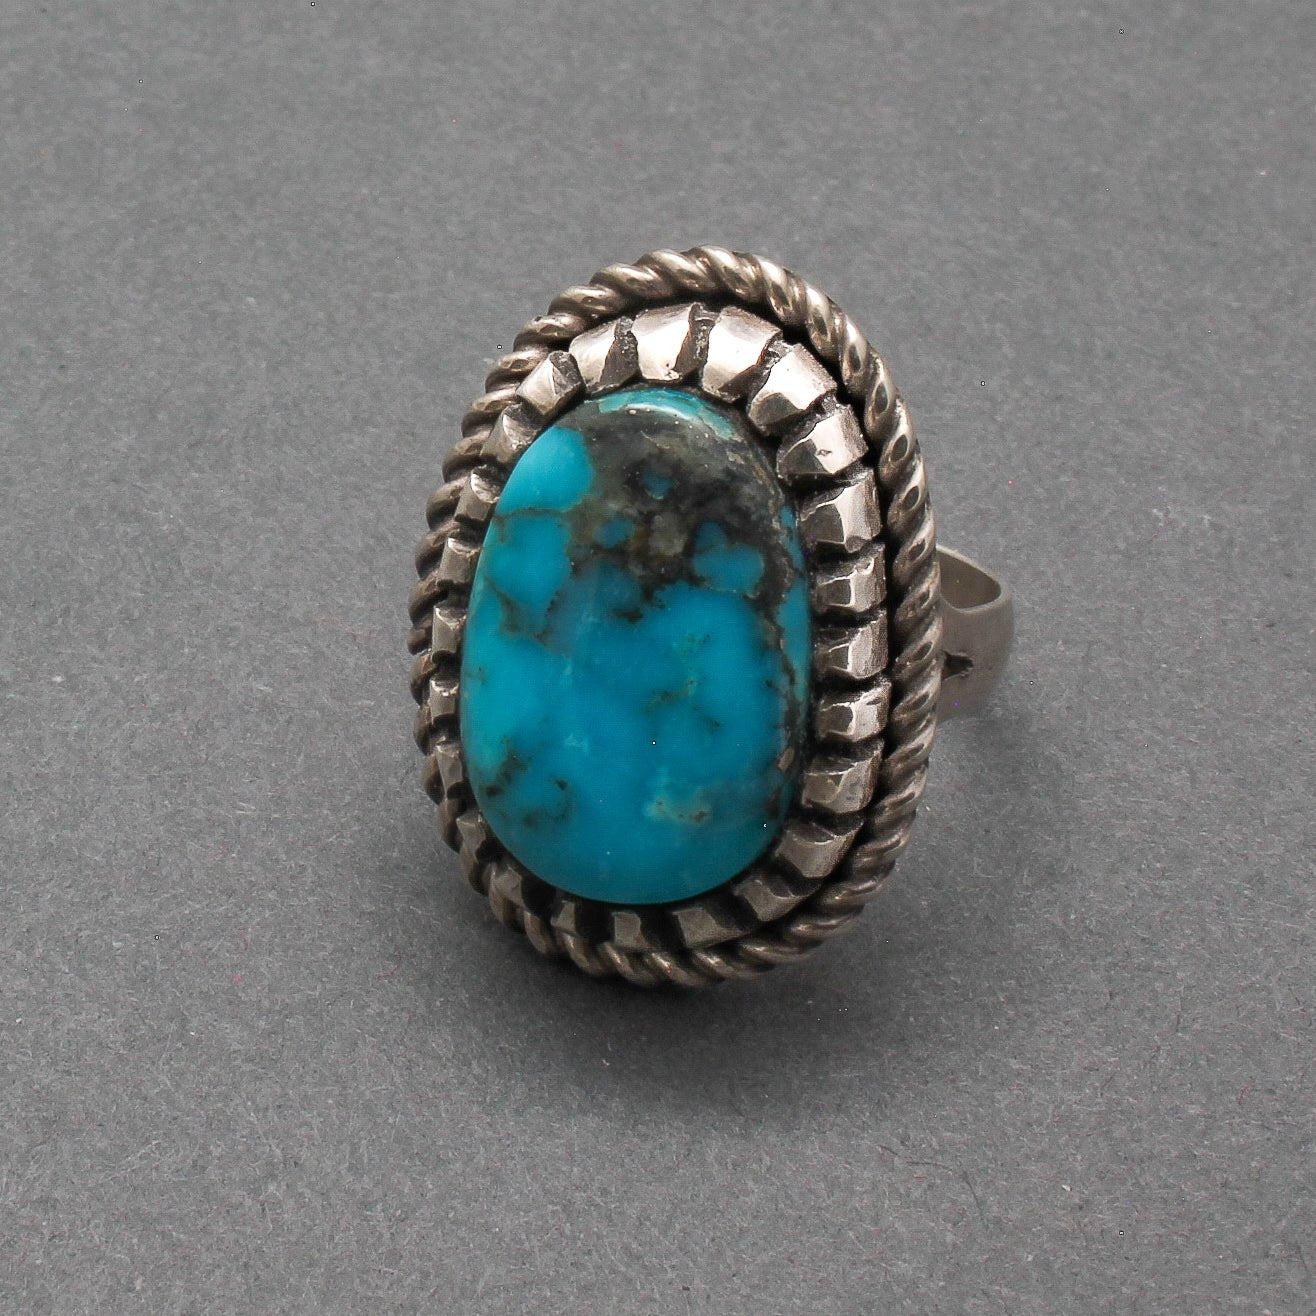 Bob Robbins Ring of Silver and Natural Turquoise With Saw Tooth Bezel - Turquoise & Tufa